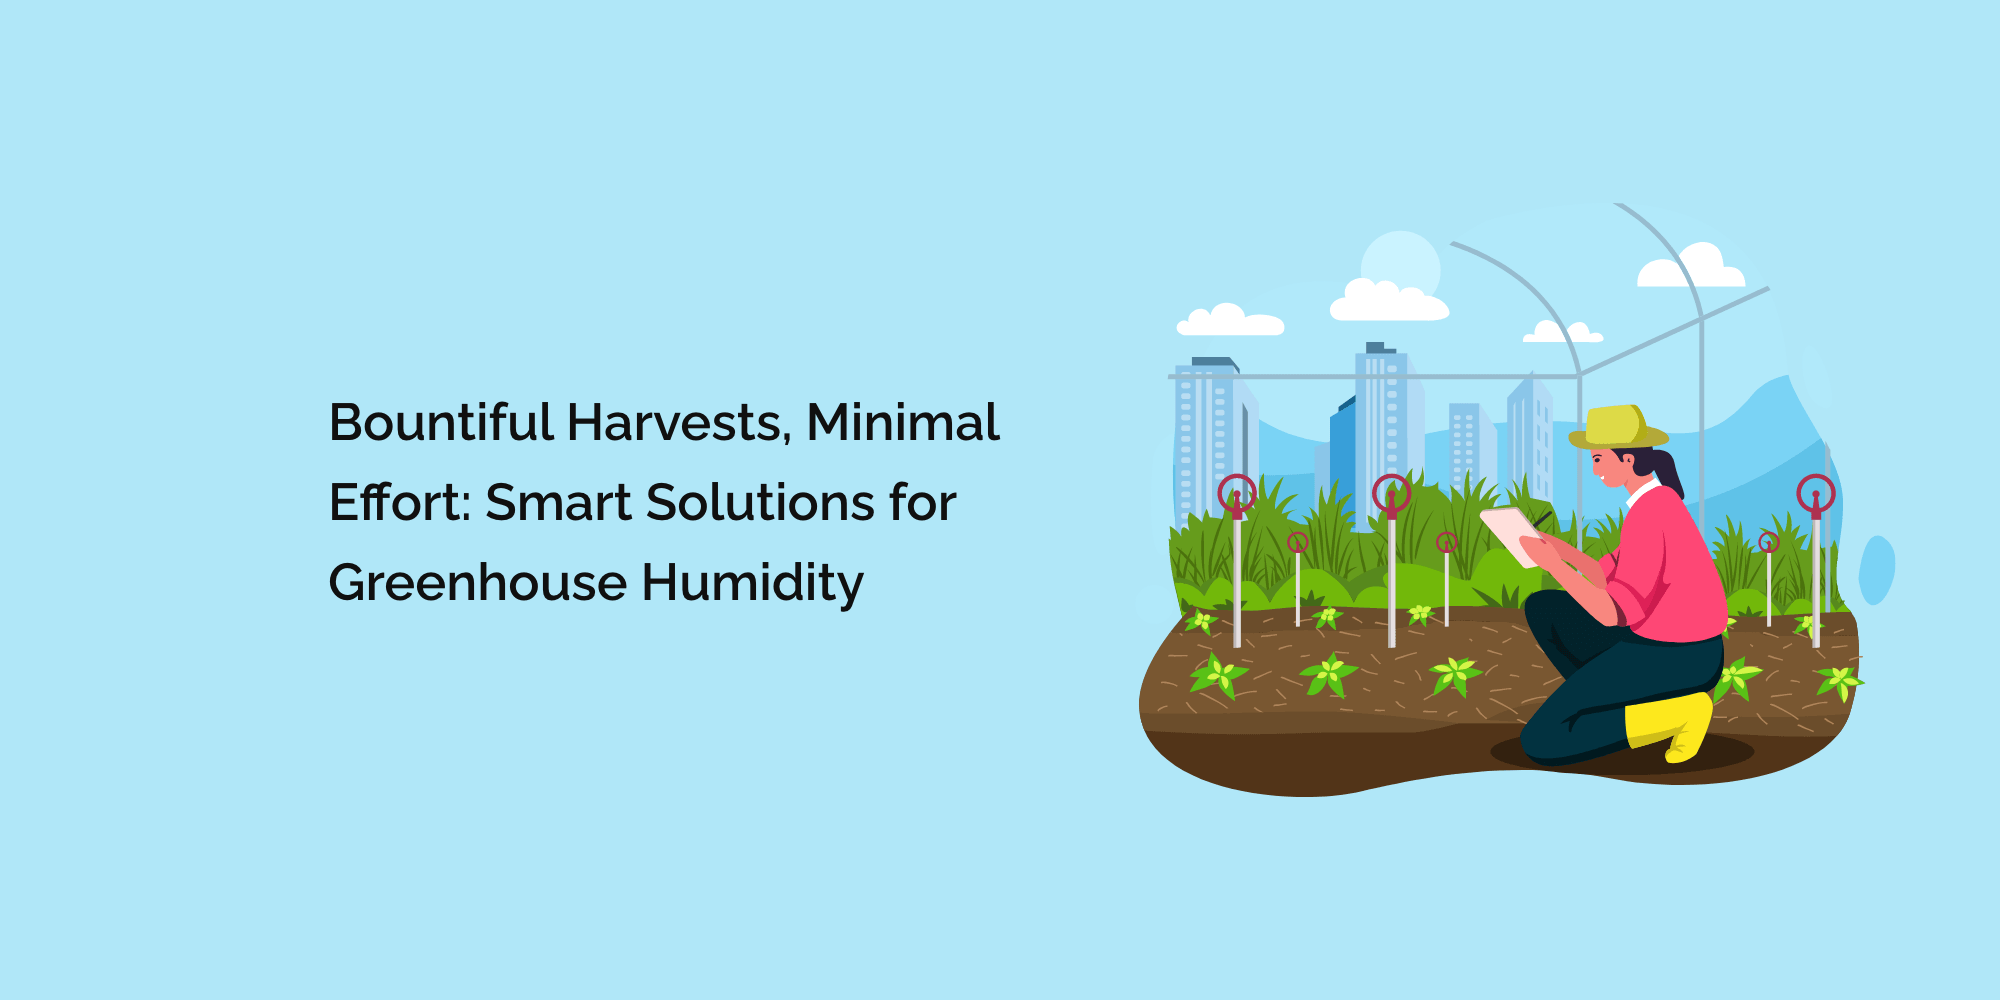 Bountiful Harvests, Minimal Effort: Smart Solutions for Greenhouse Humidity